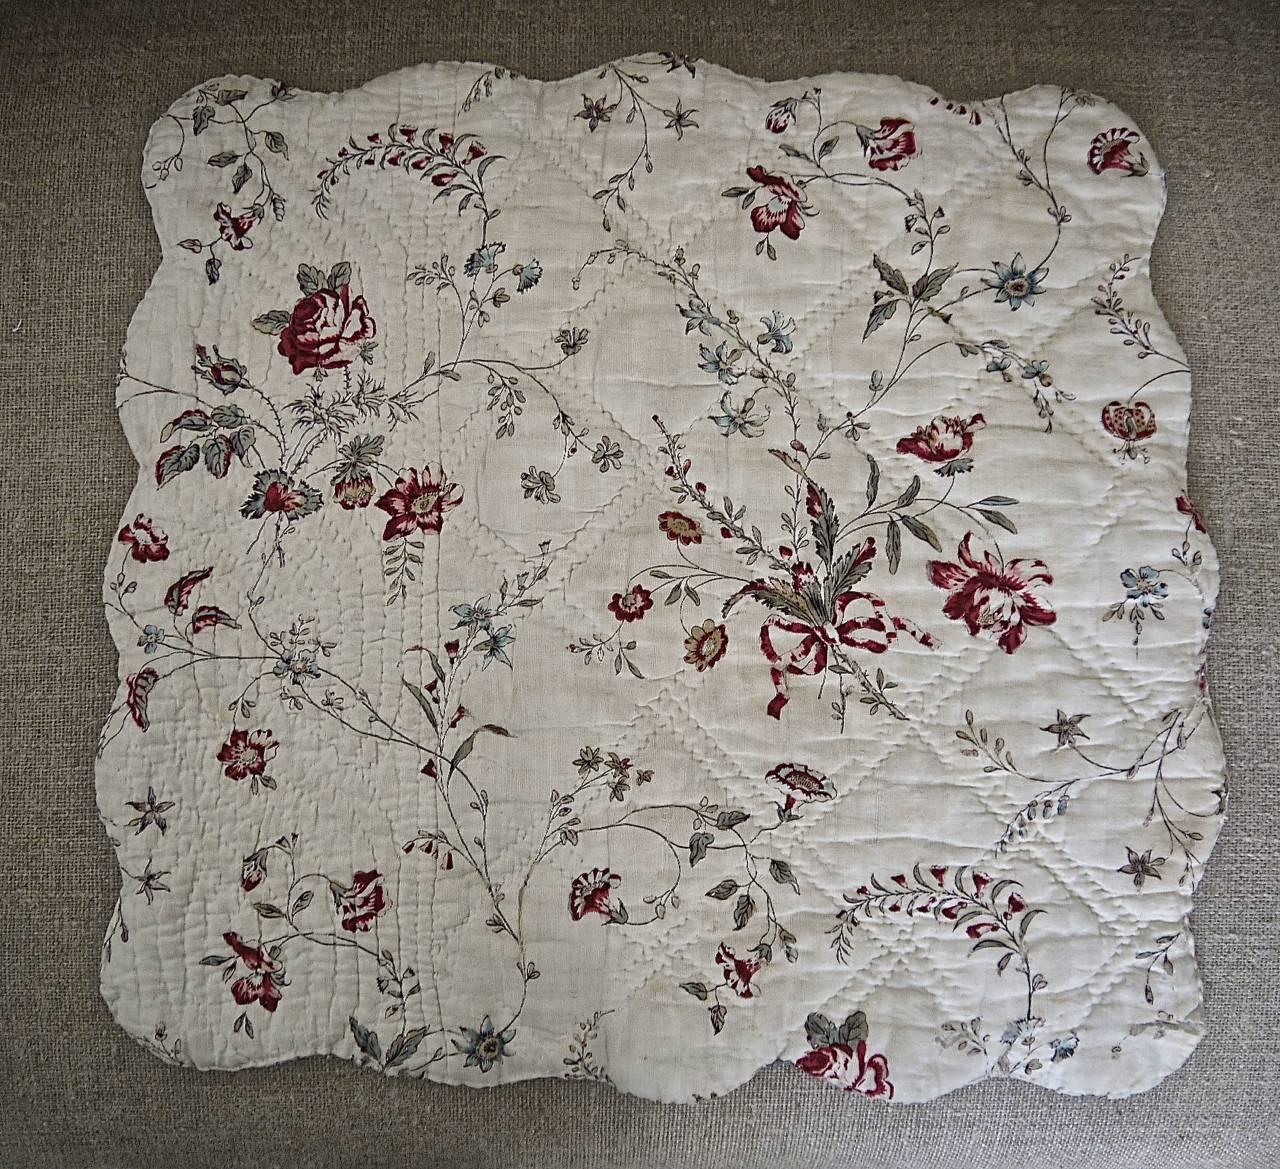 Very pretty 18th century French blockprinted and scalloped edged quilted cotton square. One side a bunches of bowed flowers with scattered roses and trailing branches. This side is in a fair condition with some faded stains and a fair amount of